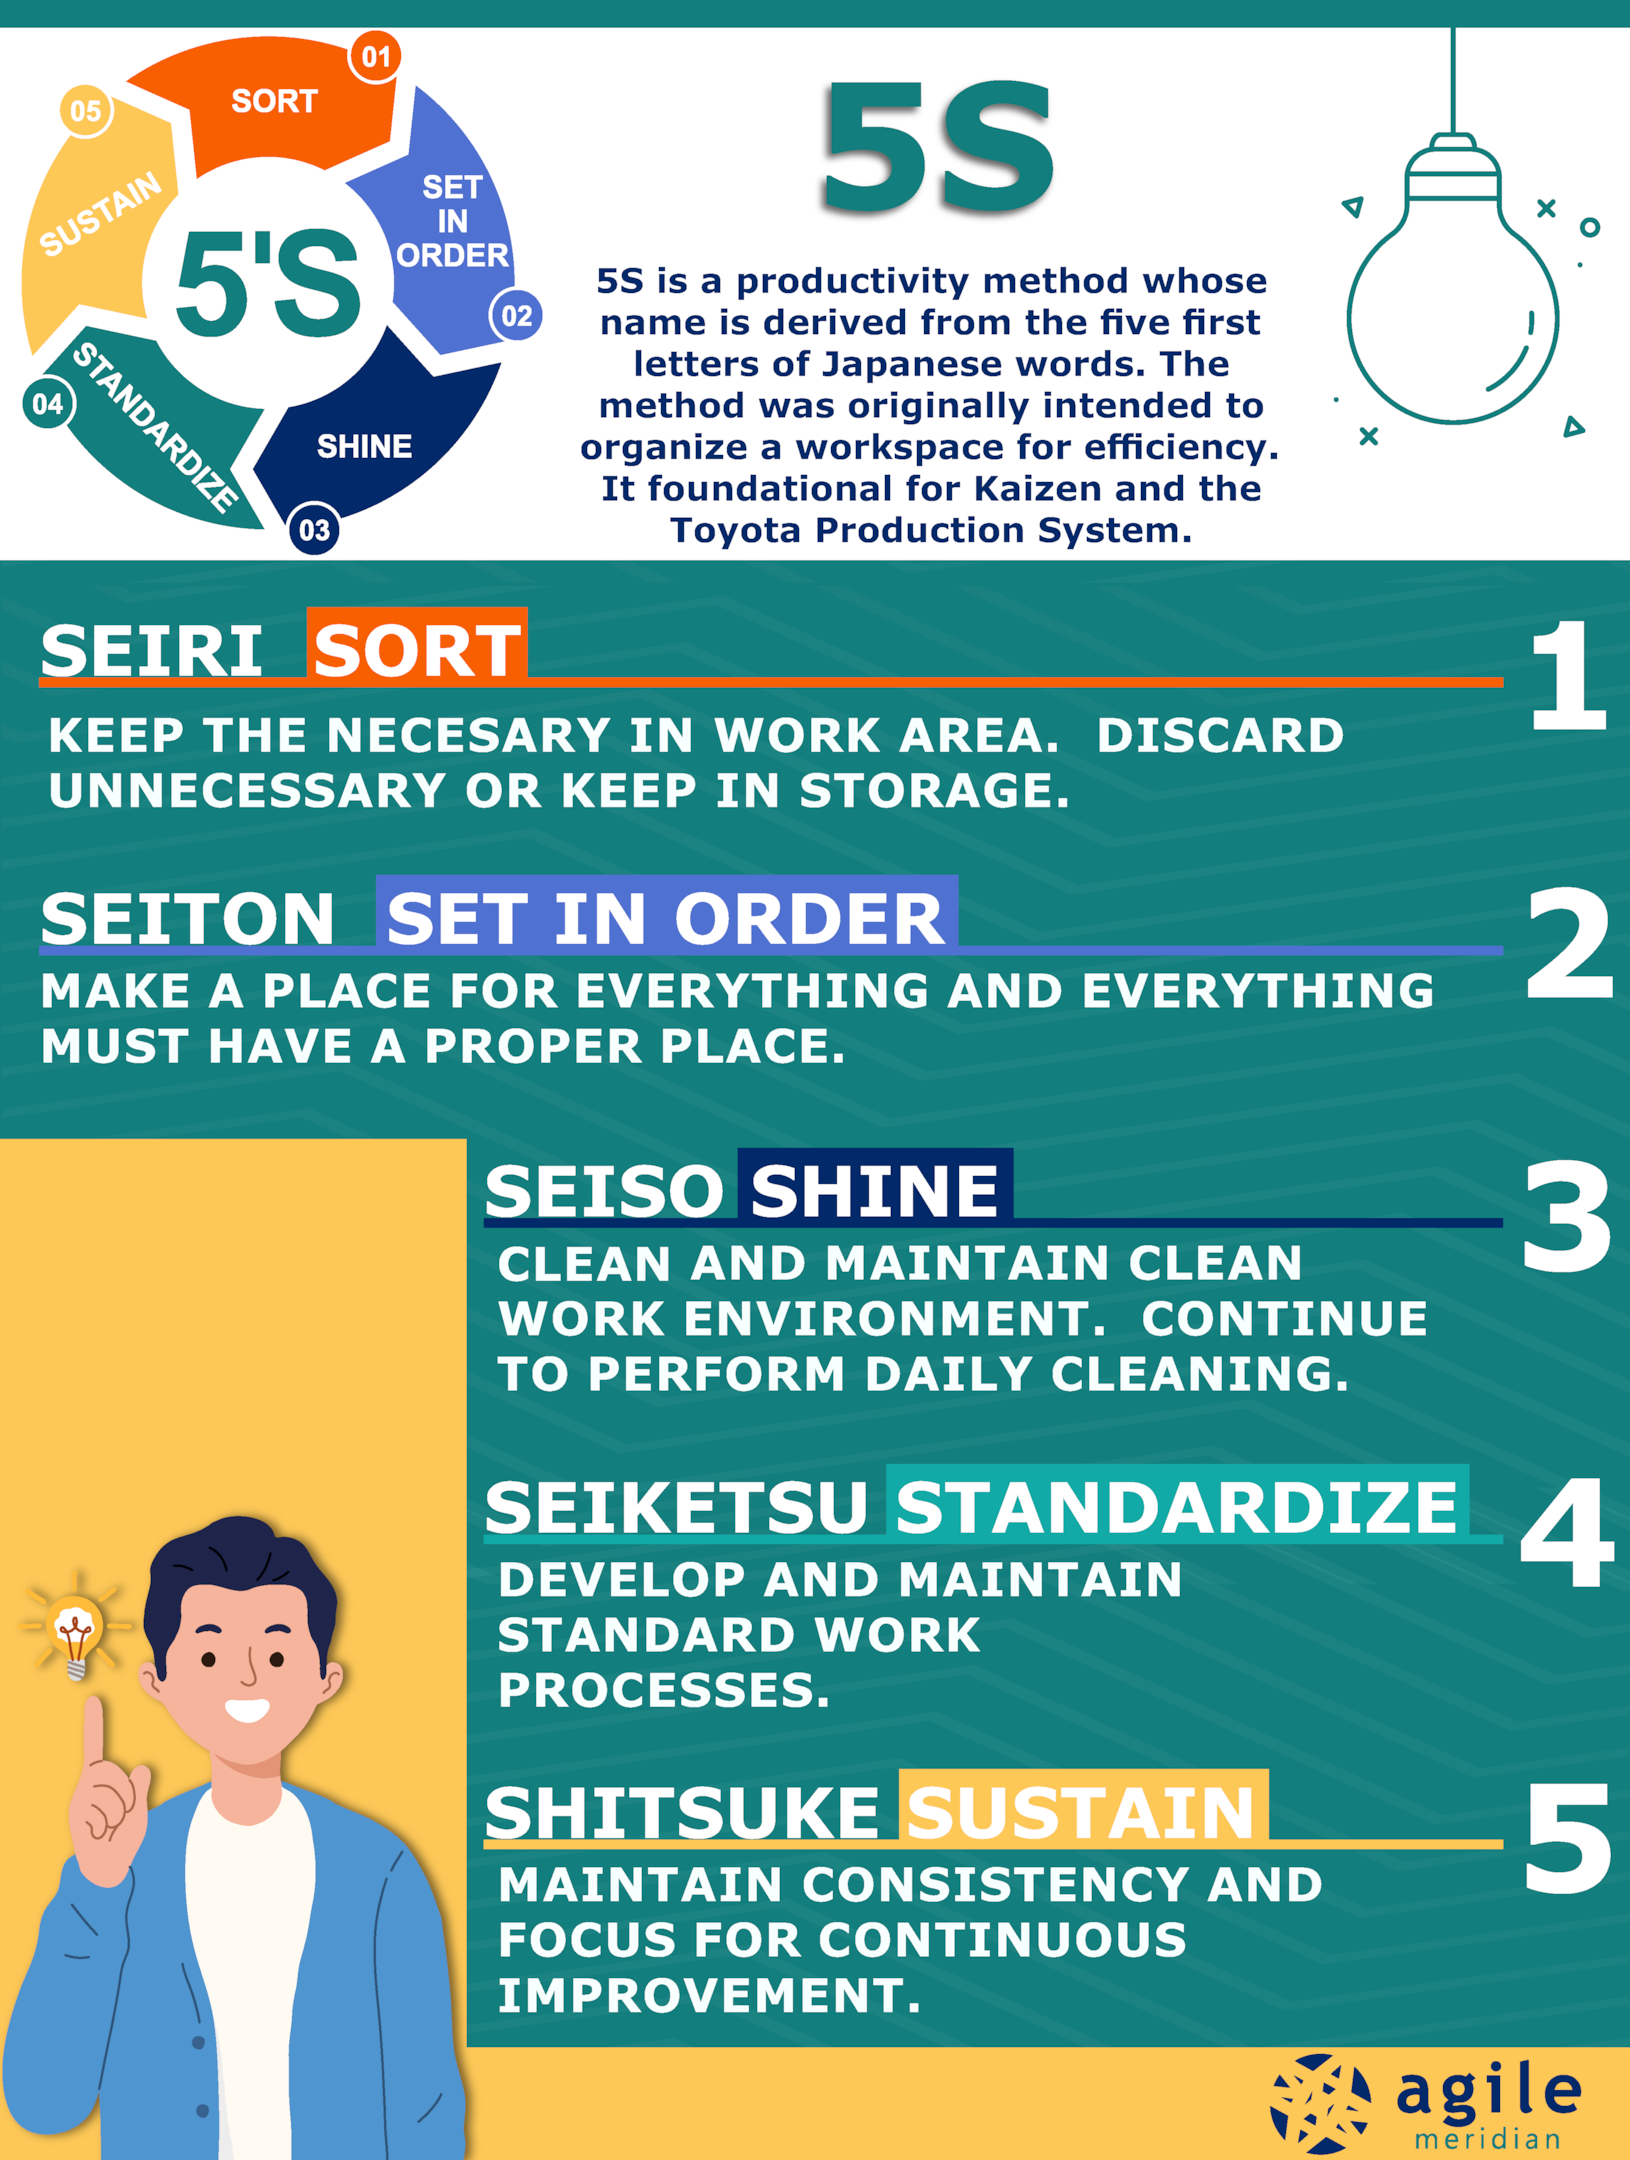 Agile Meridian Infographic about Kaizen's 5S Approach.